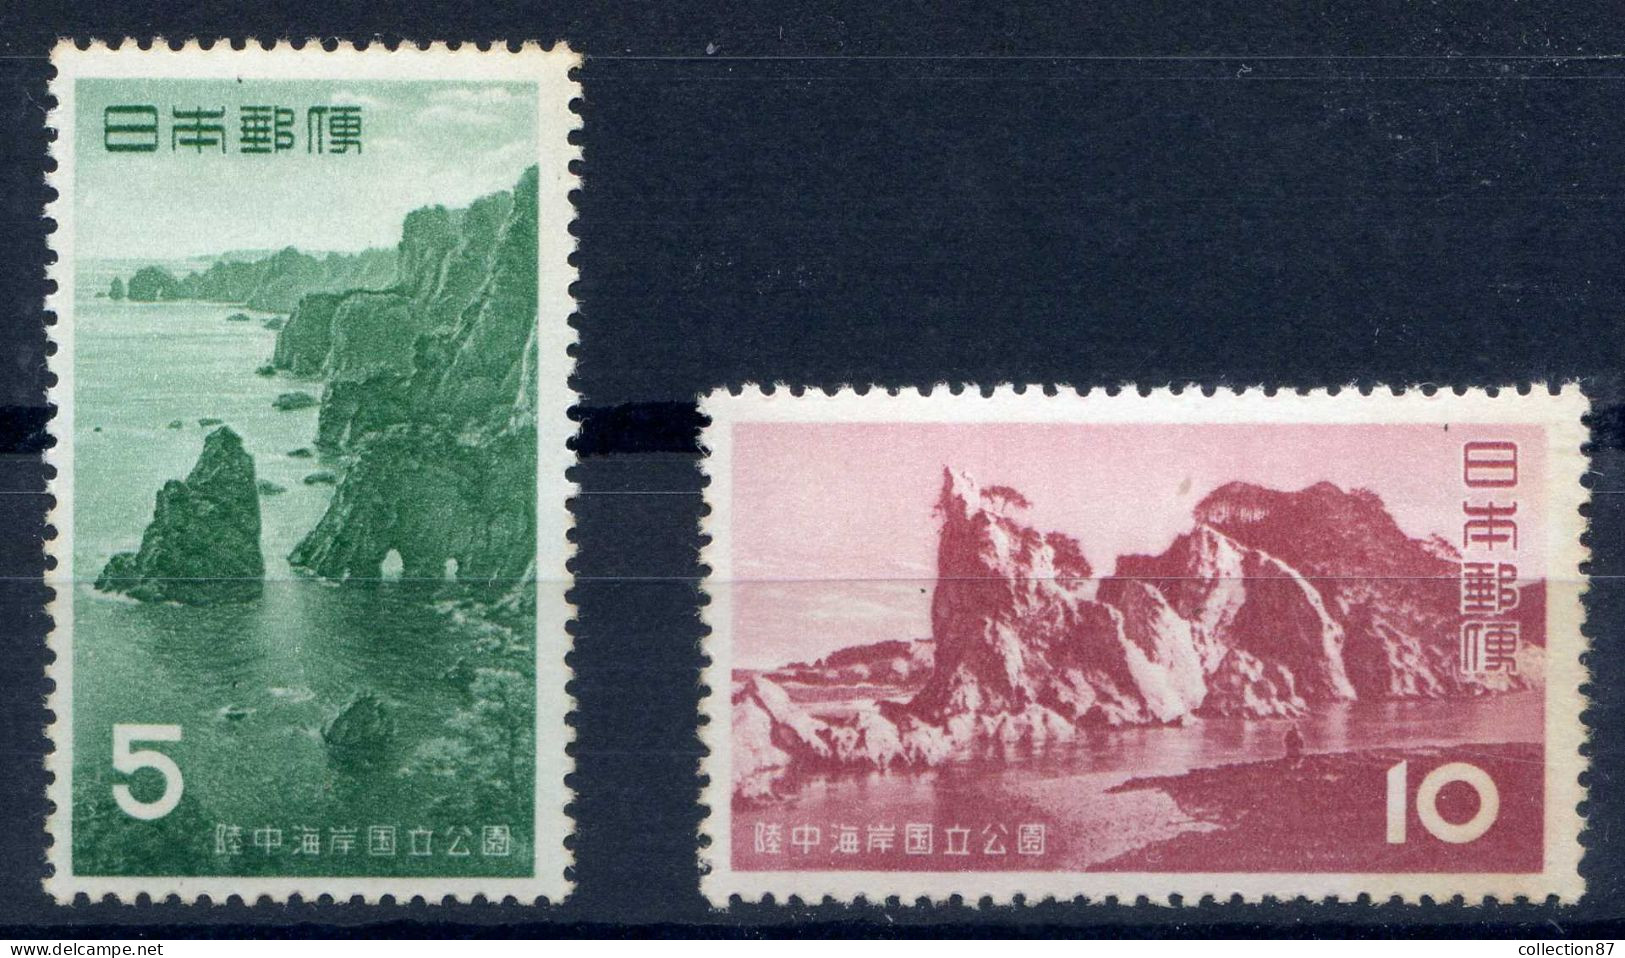 REF 002 > JAPON < Yvert  N° 567 à 568 * * Neuf Luxe MNH * * > - Unused Stamps